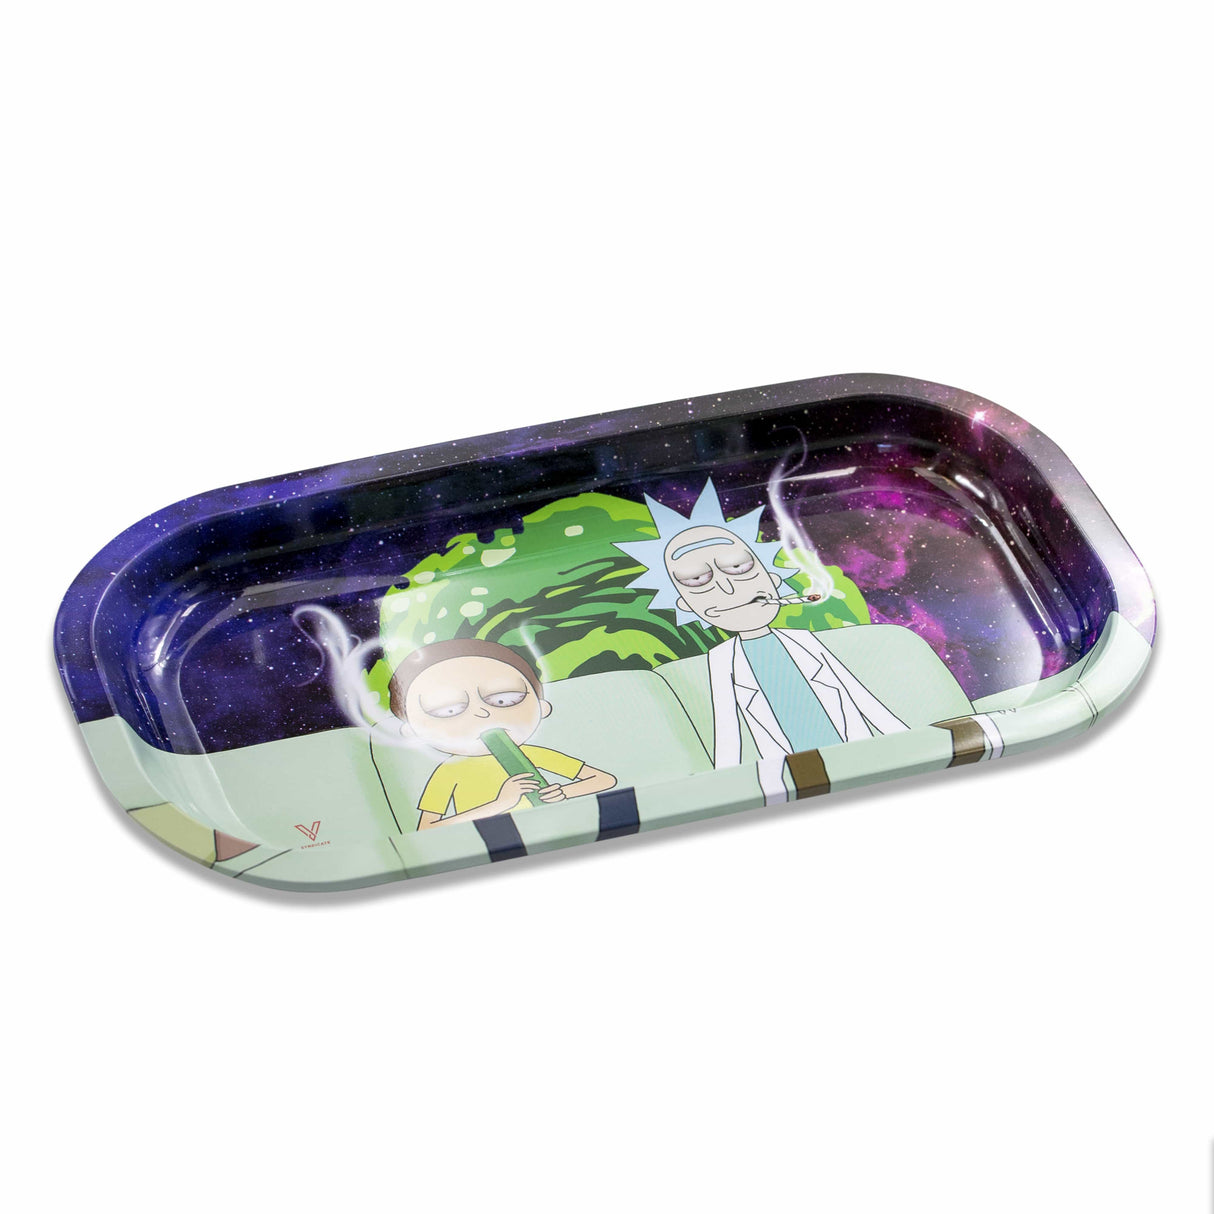 V Syndicate Couch Lock Metal Rollin' Tray with vibrant Rick and Morty design, compact and portable